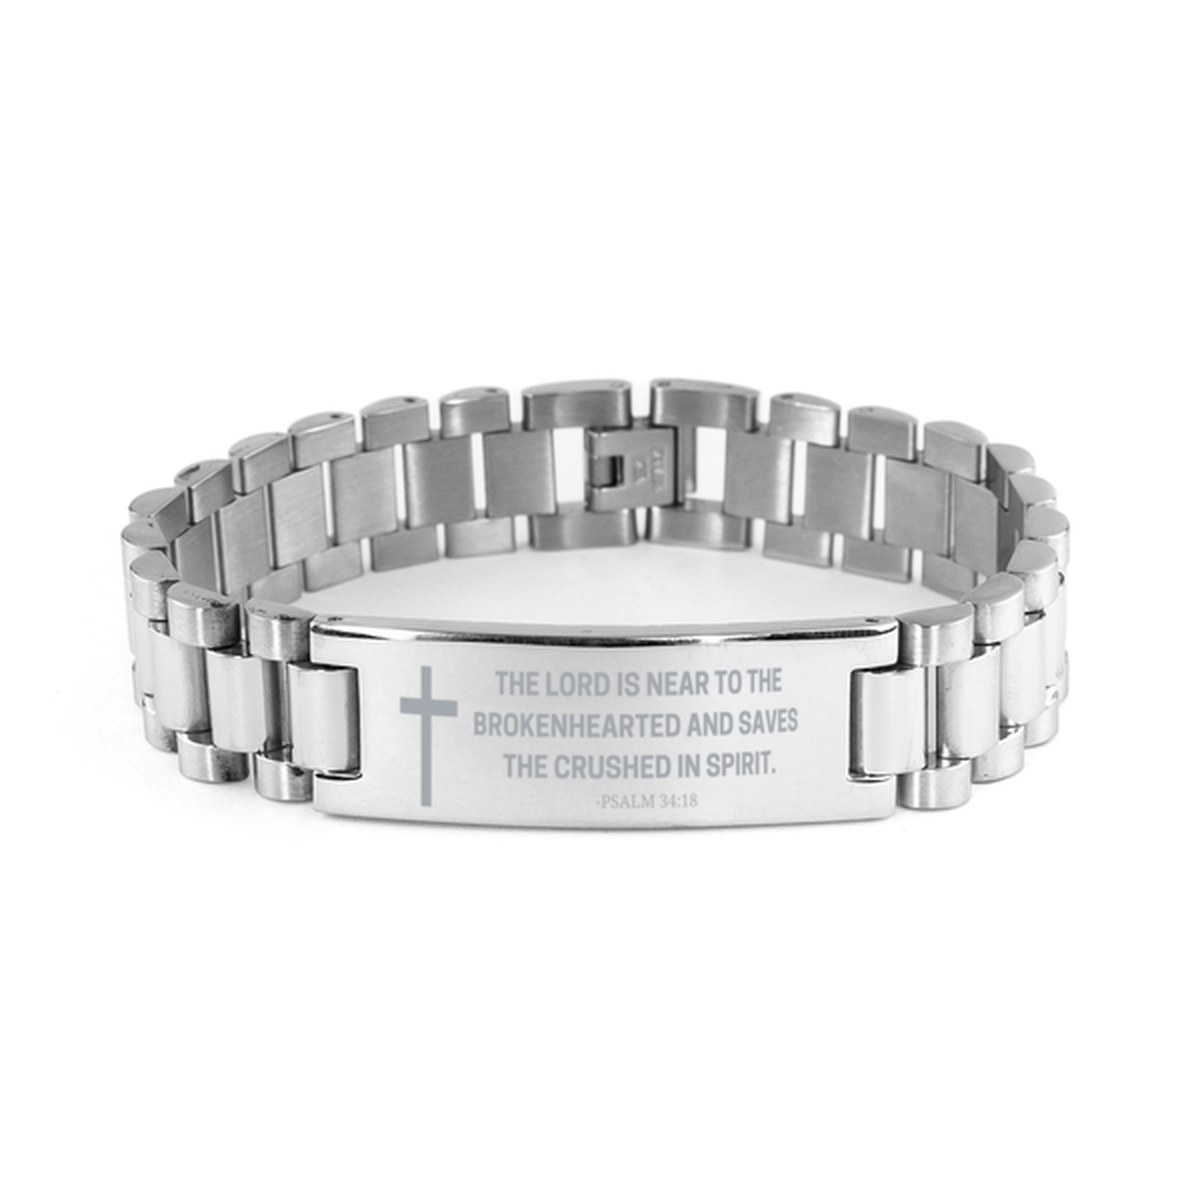 Baptism Gifts For Teenage Boys Girls, Christian Bible Verse Ladder Stainless Steel Bracelet, The Lord is near to the brokenhearted, Catholic Confirmation Gifts for Son, Godson, Grandson, Nephew